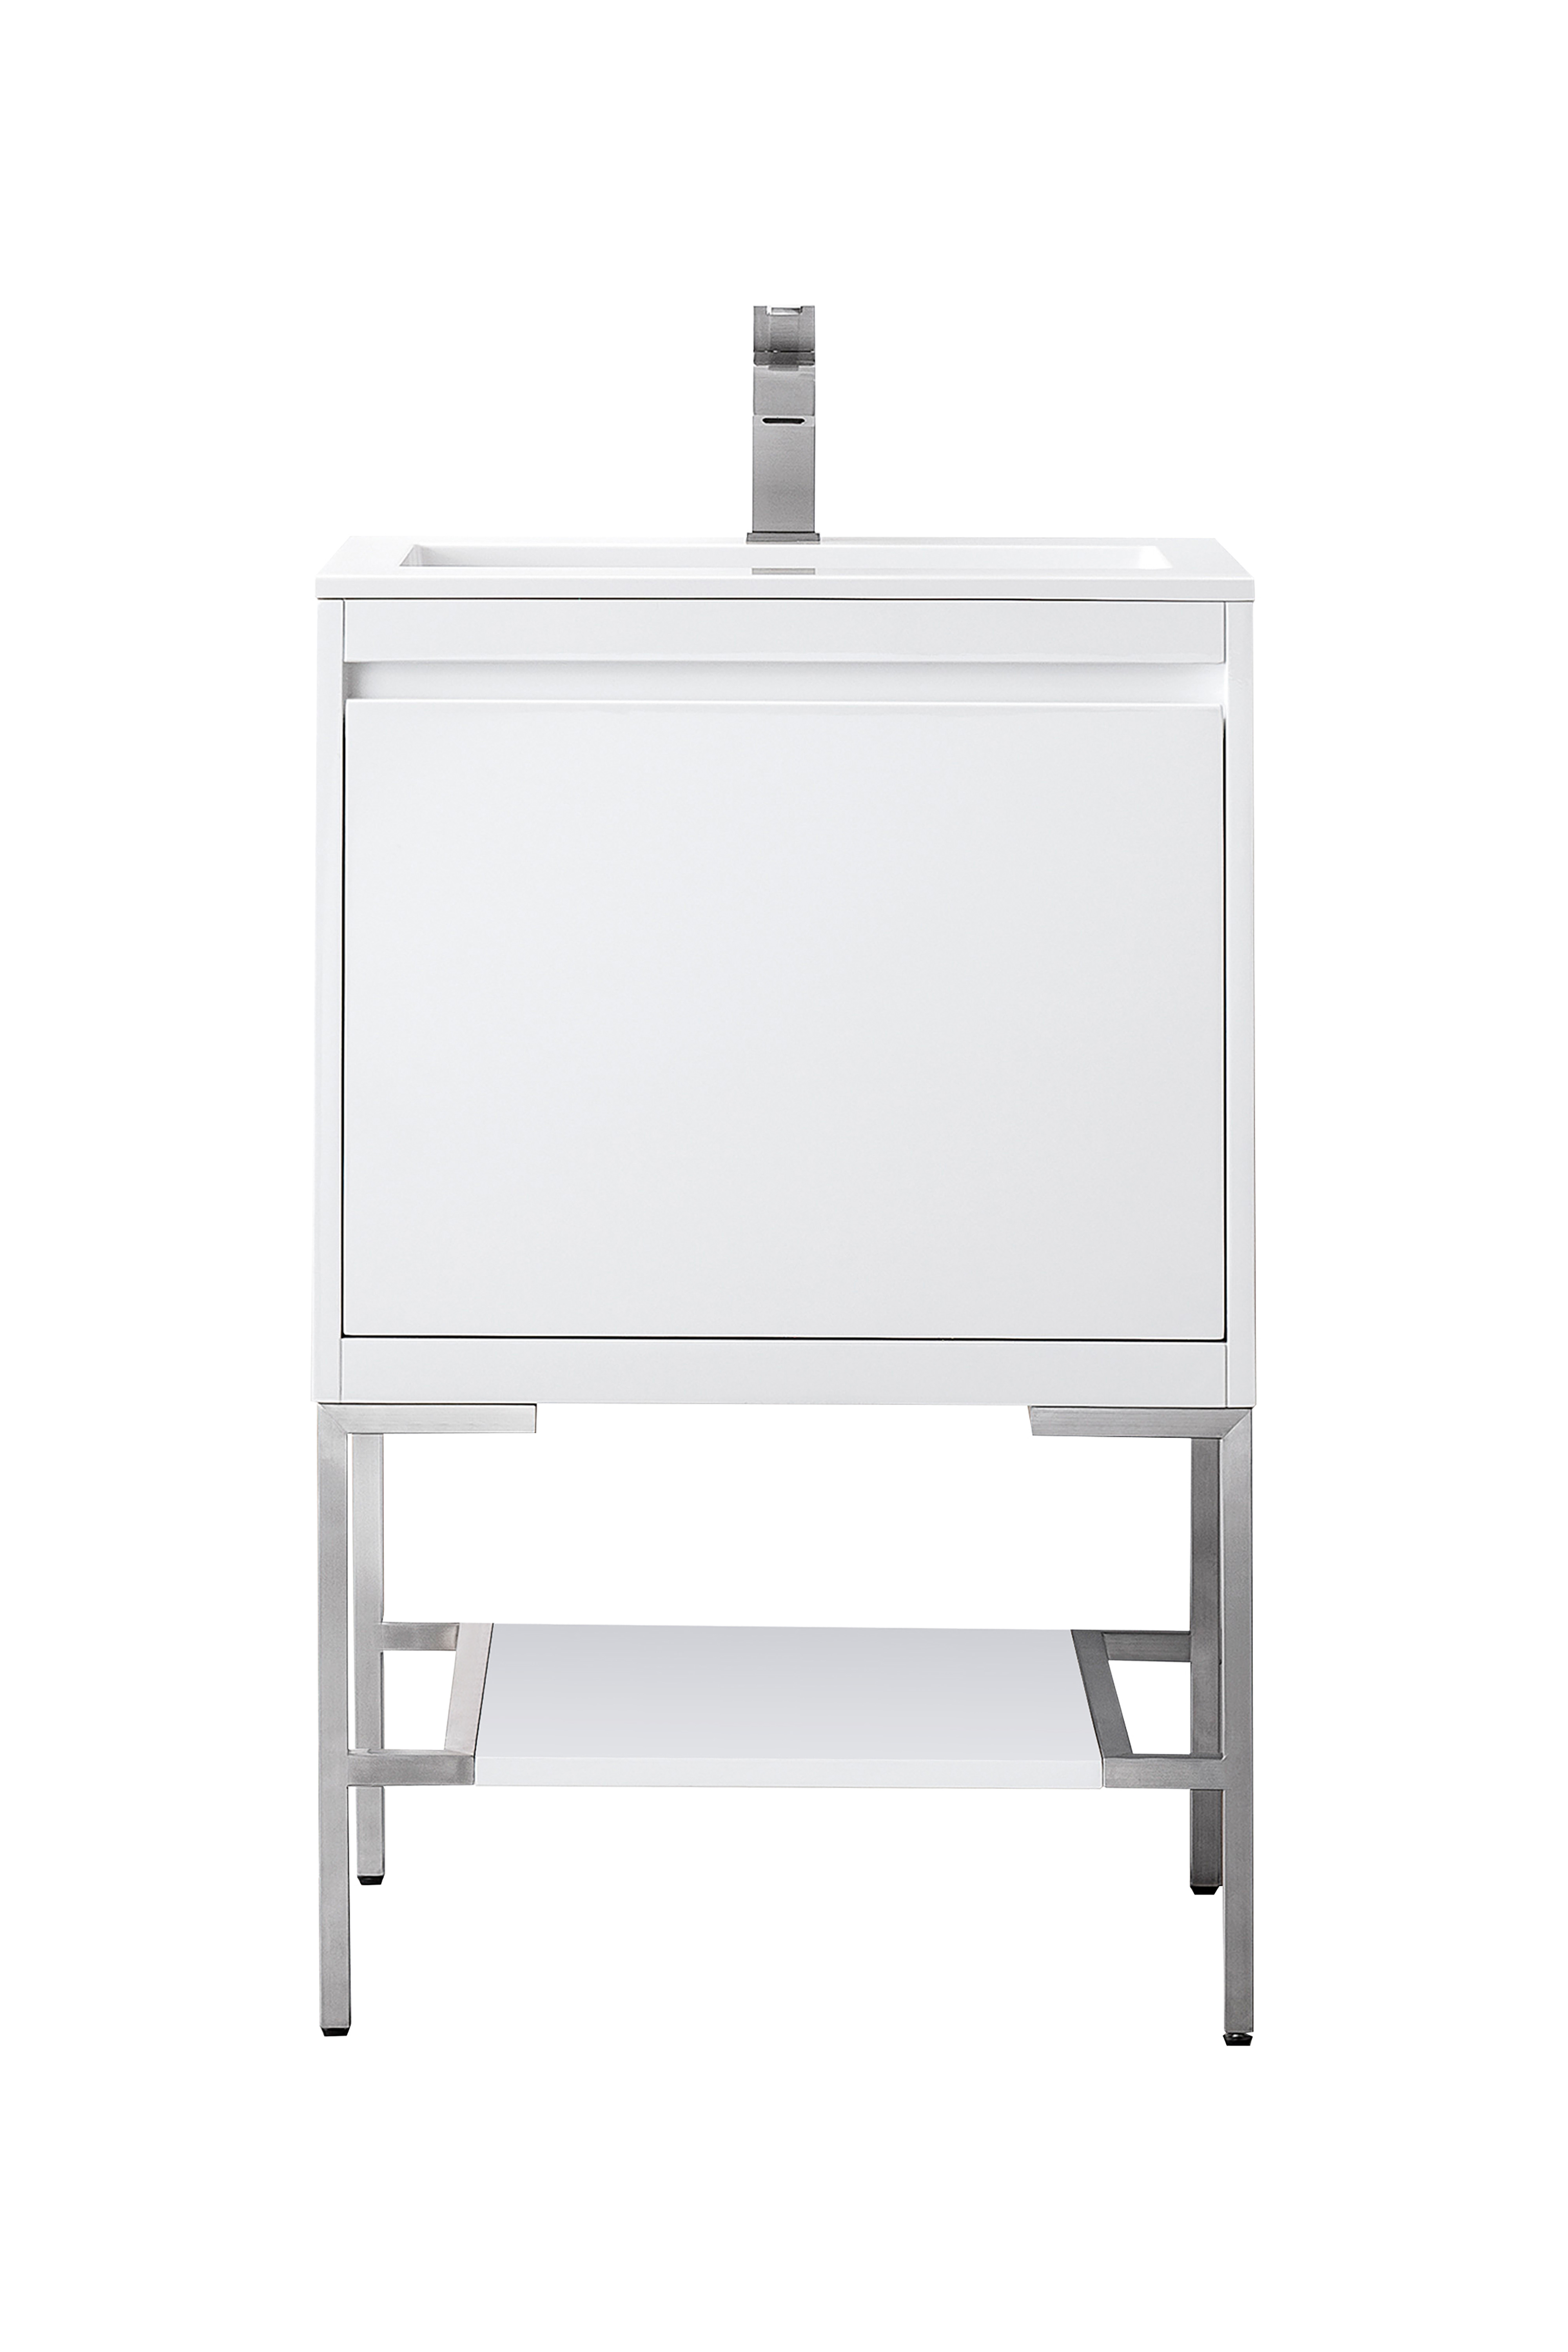 James Martin 801V23.6GWBNKGW Milan 23.6" Single Vanity Cabinet, Glossy White, Brushed Nickel w/Glossy White Composite Top